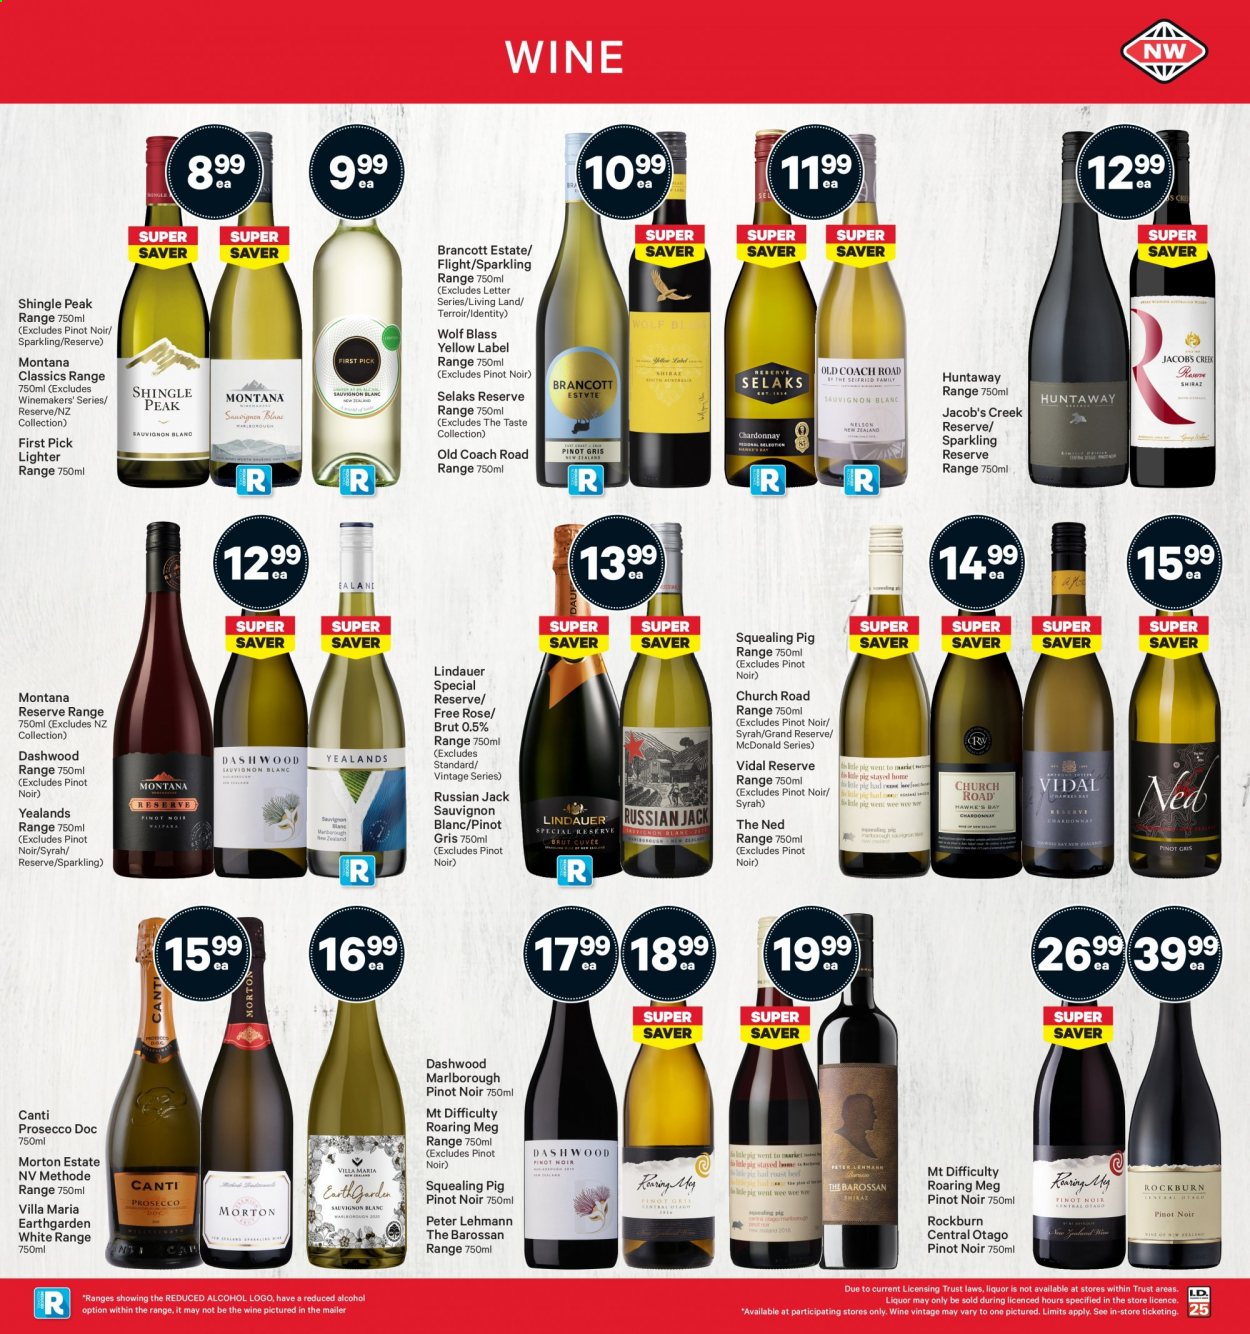 thumbnail - New World mailer - 21.06.2021 - 27.06.2021 - Sales products - red wine, sparkling wine, white wine, prosecco, wine, Pinot Noir, Lindauer, alcohol, Syrah, Jacob's Creek, Pinot Grigio, Sauvignon Blanc, rosé wine, Brut. Page 31.